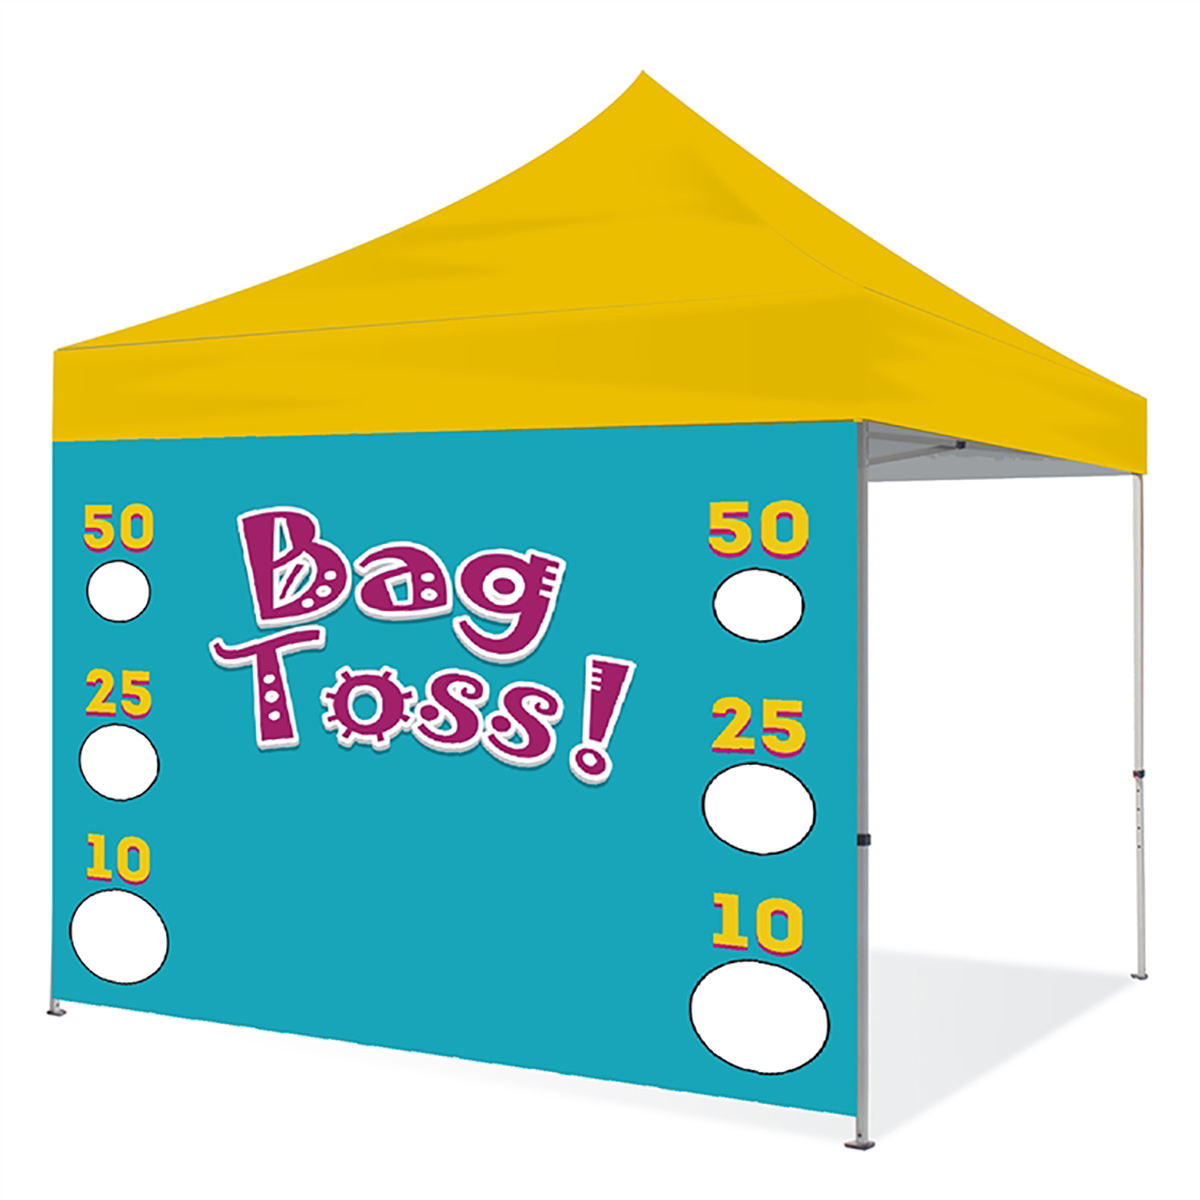 10ft Pop Up Canopy Wall - Game